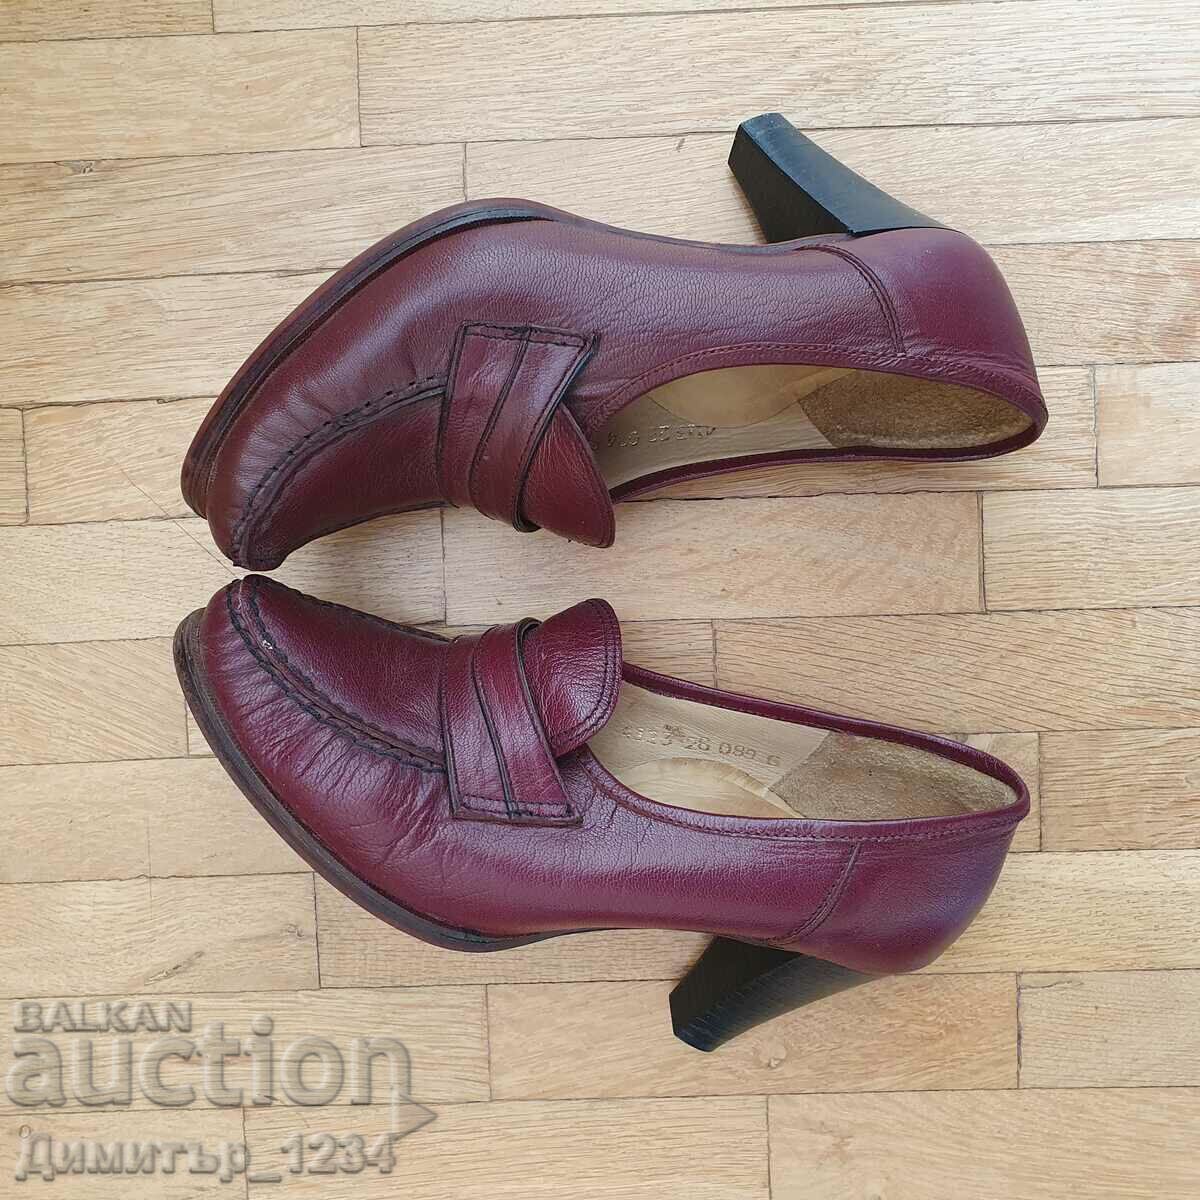 Women's shoes with heels made of natural leather